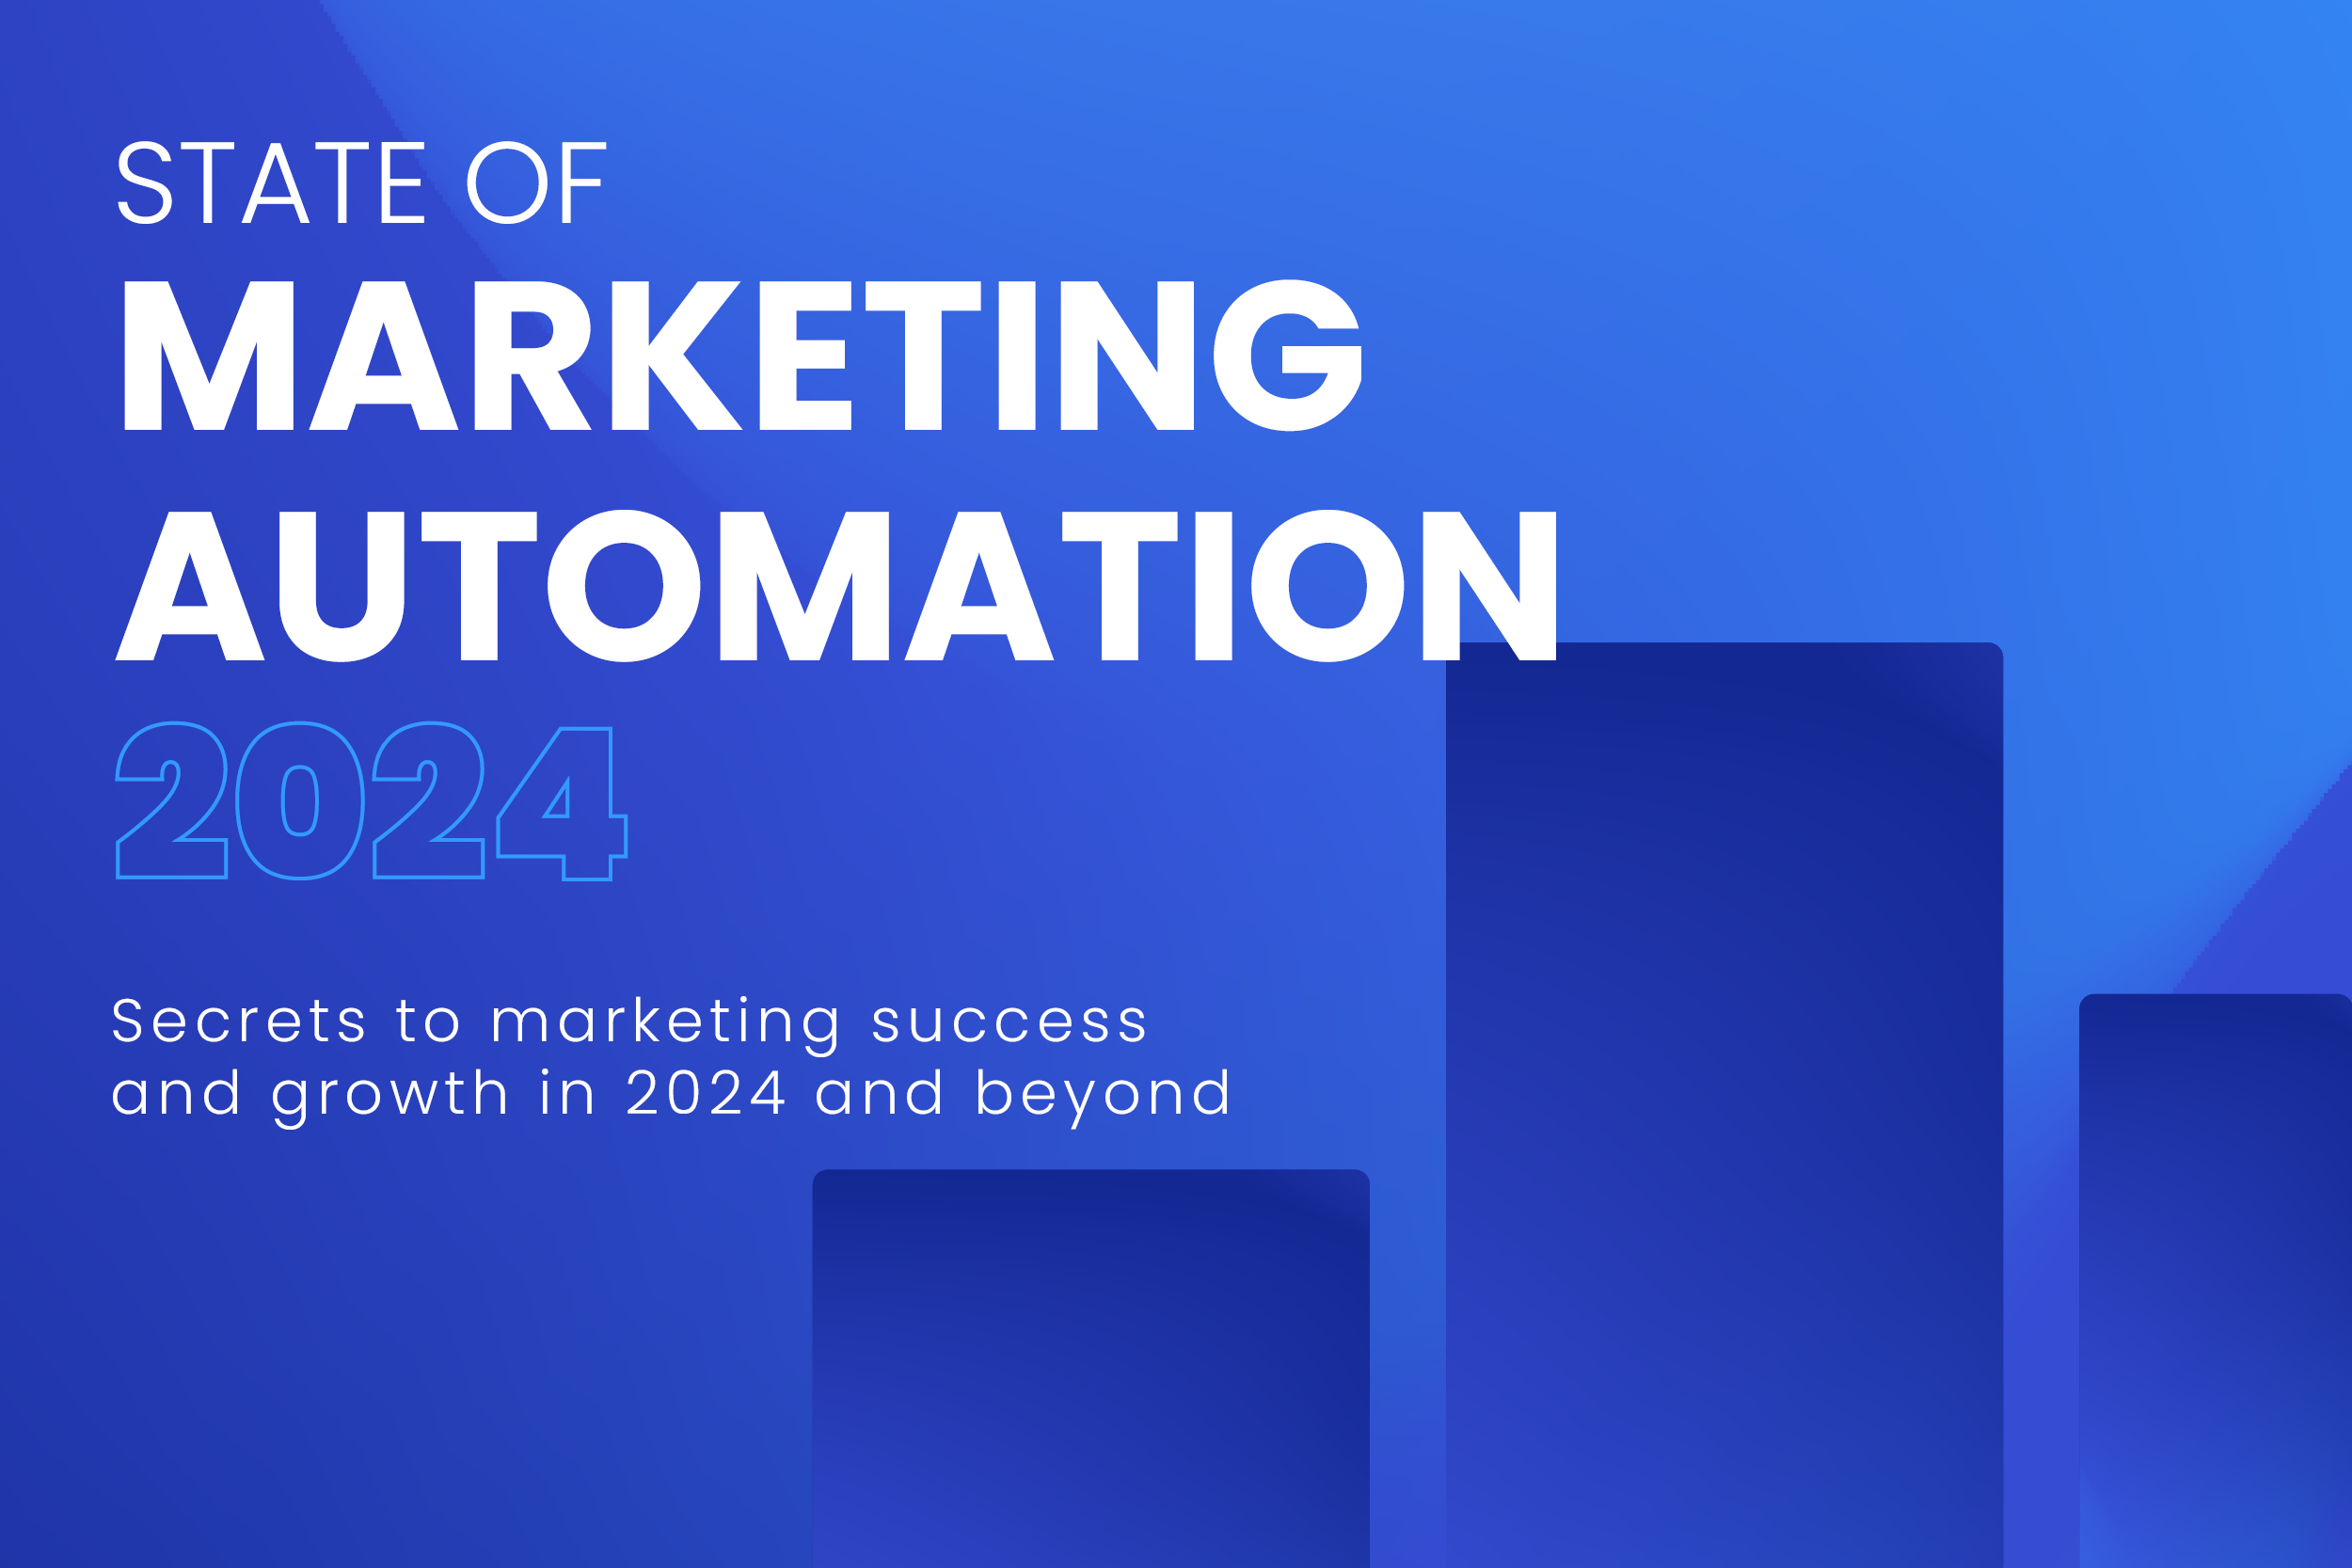 State of Marketing Automation 2024